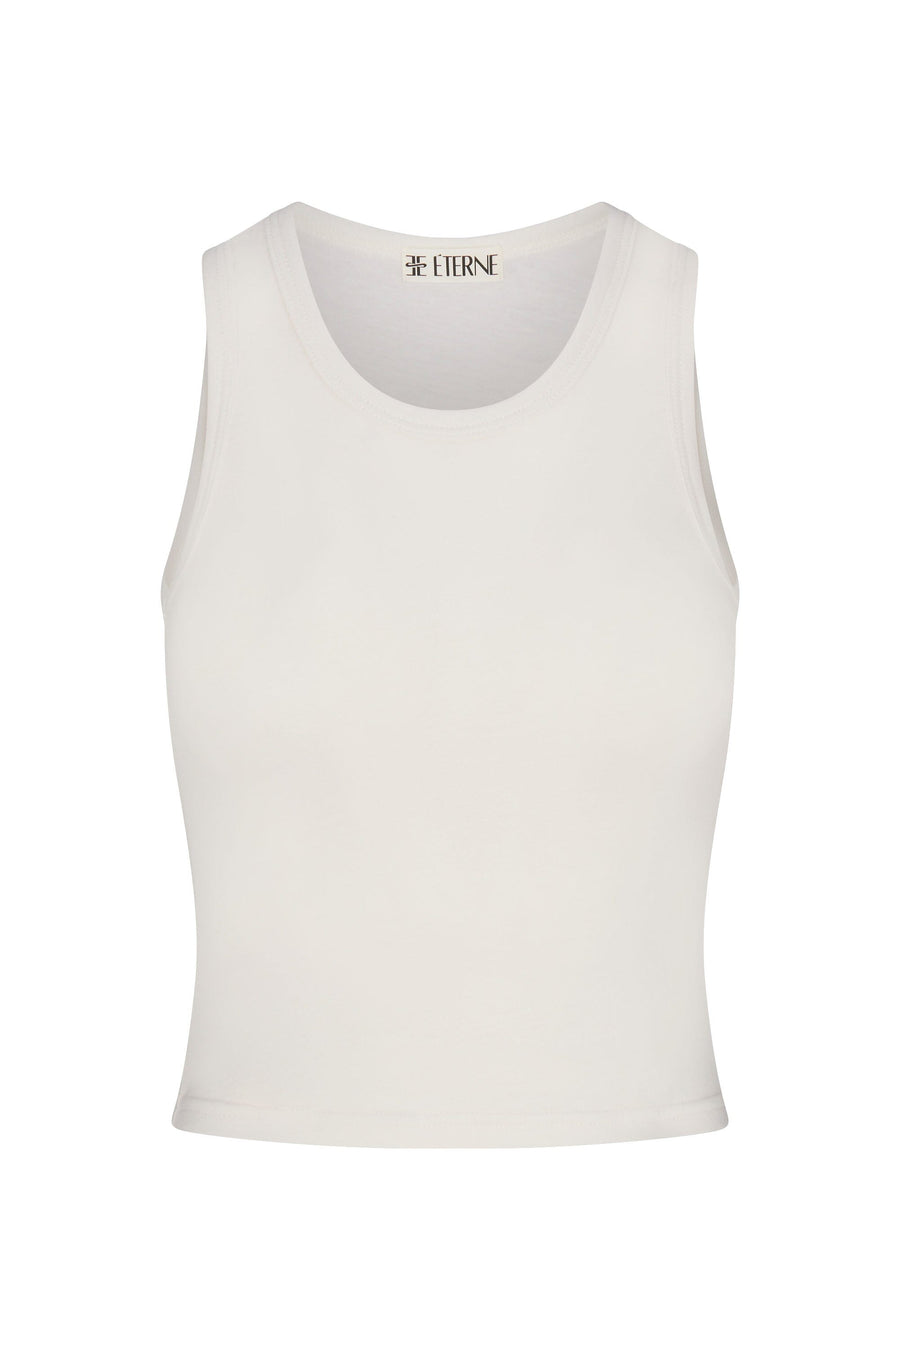 Fitted Tank Ivory TOPS ÉTERNE 